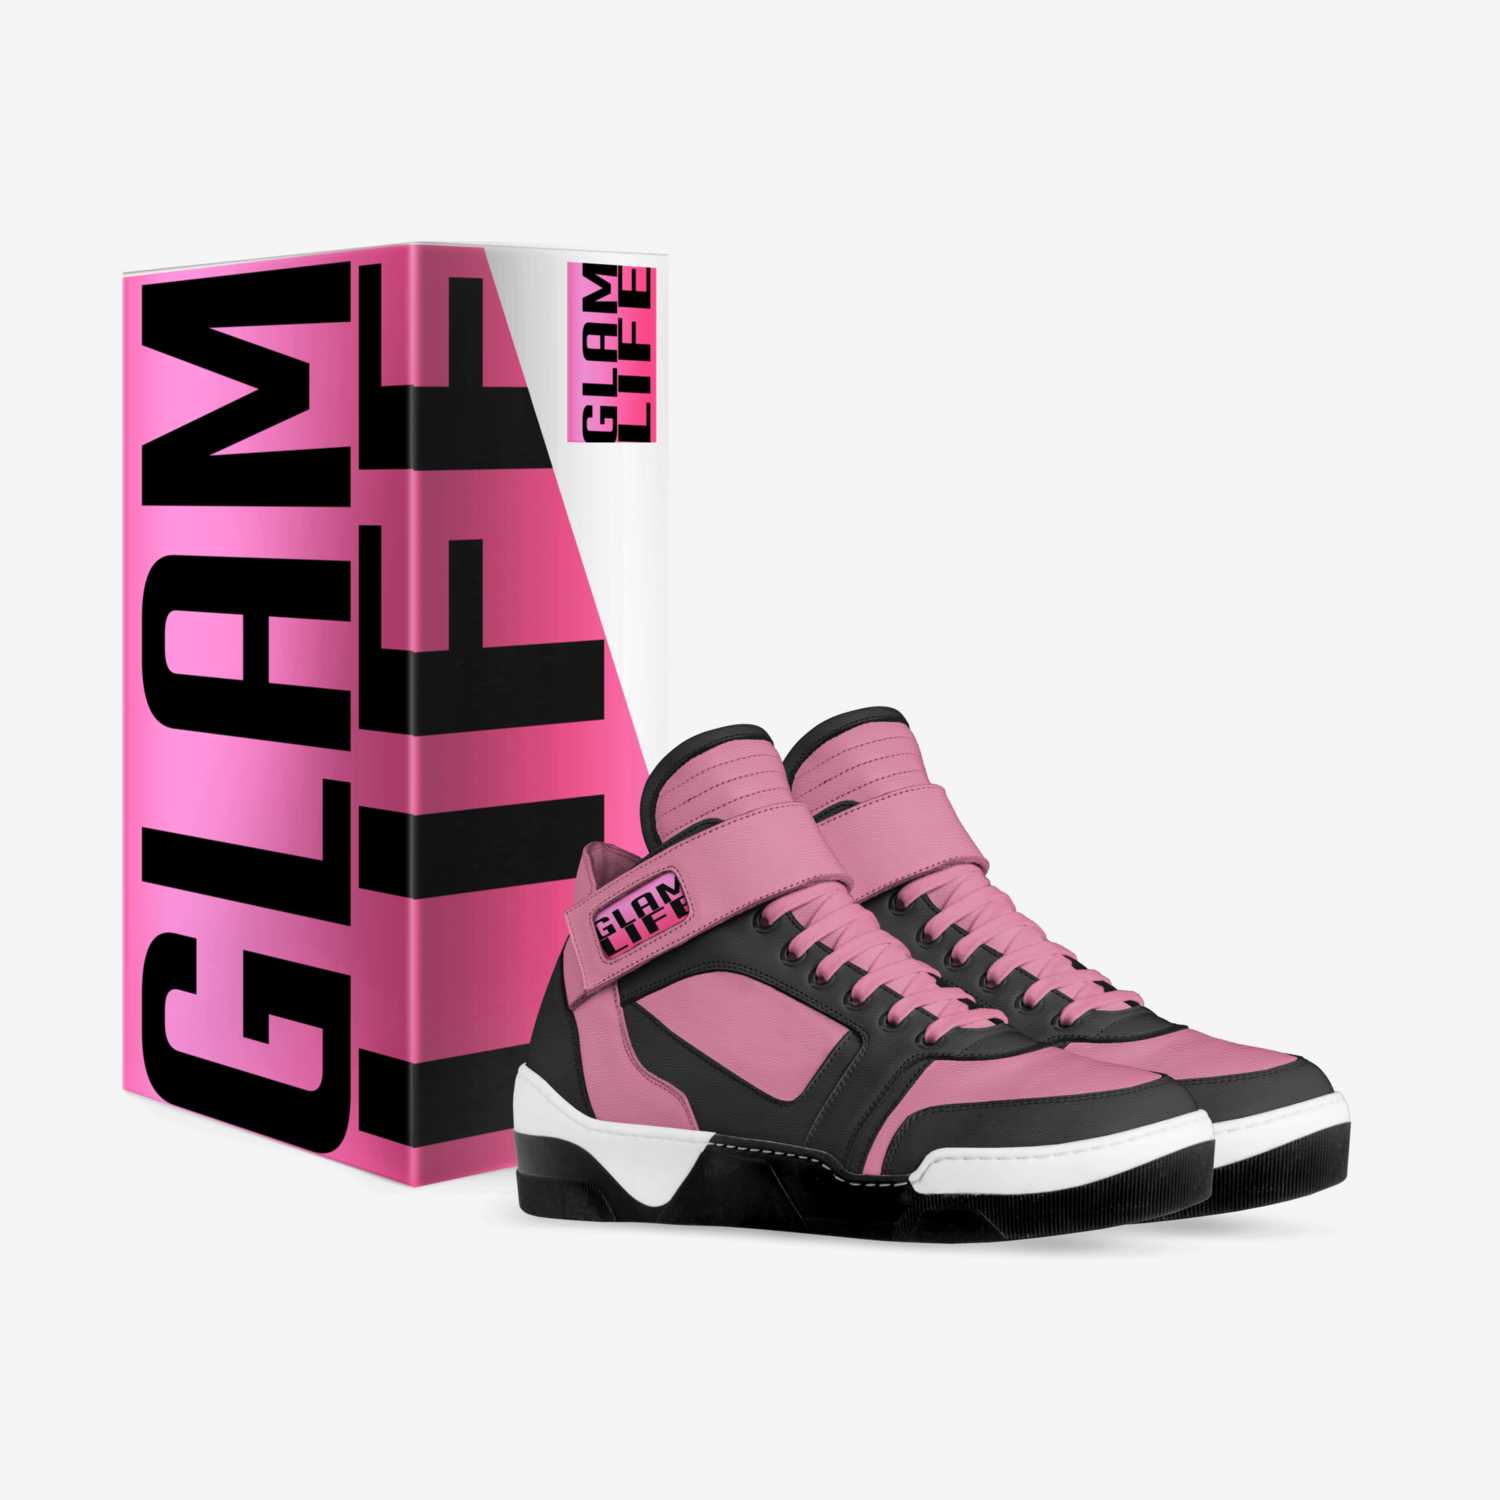 GLAMLIFE BUBBLEGUM custom made in Italy shoes by Anthony Cox | Box view